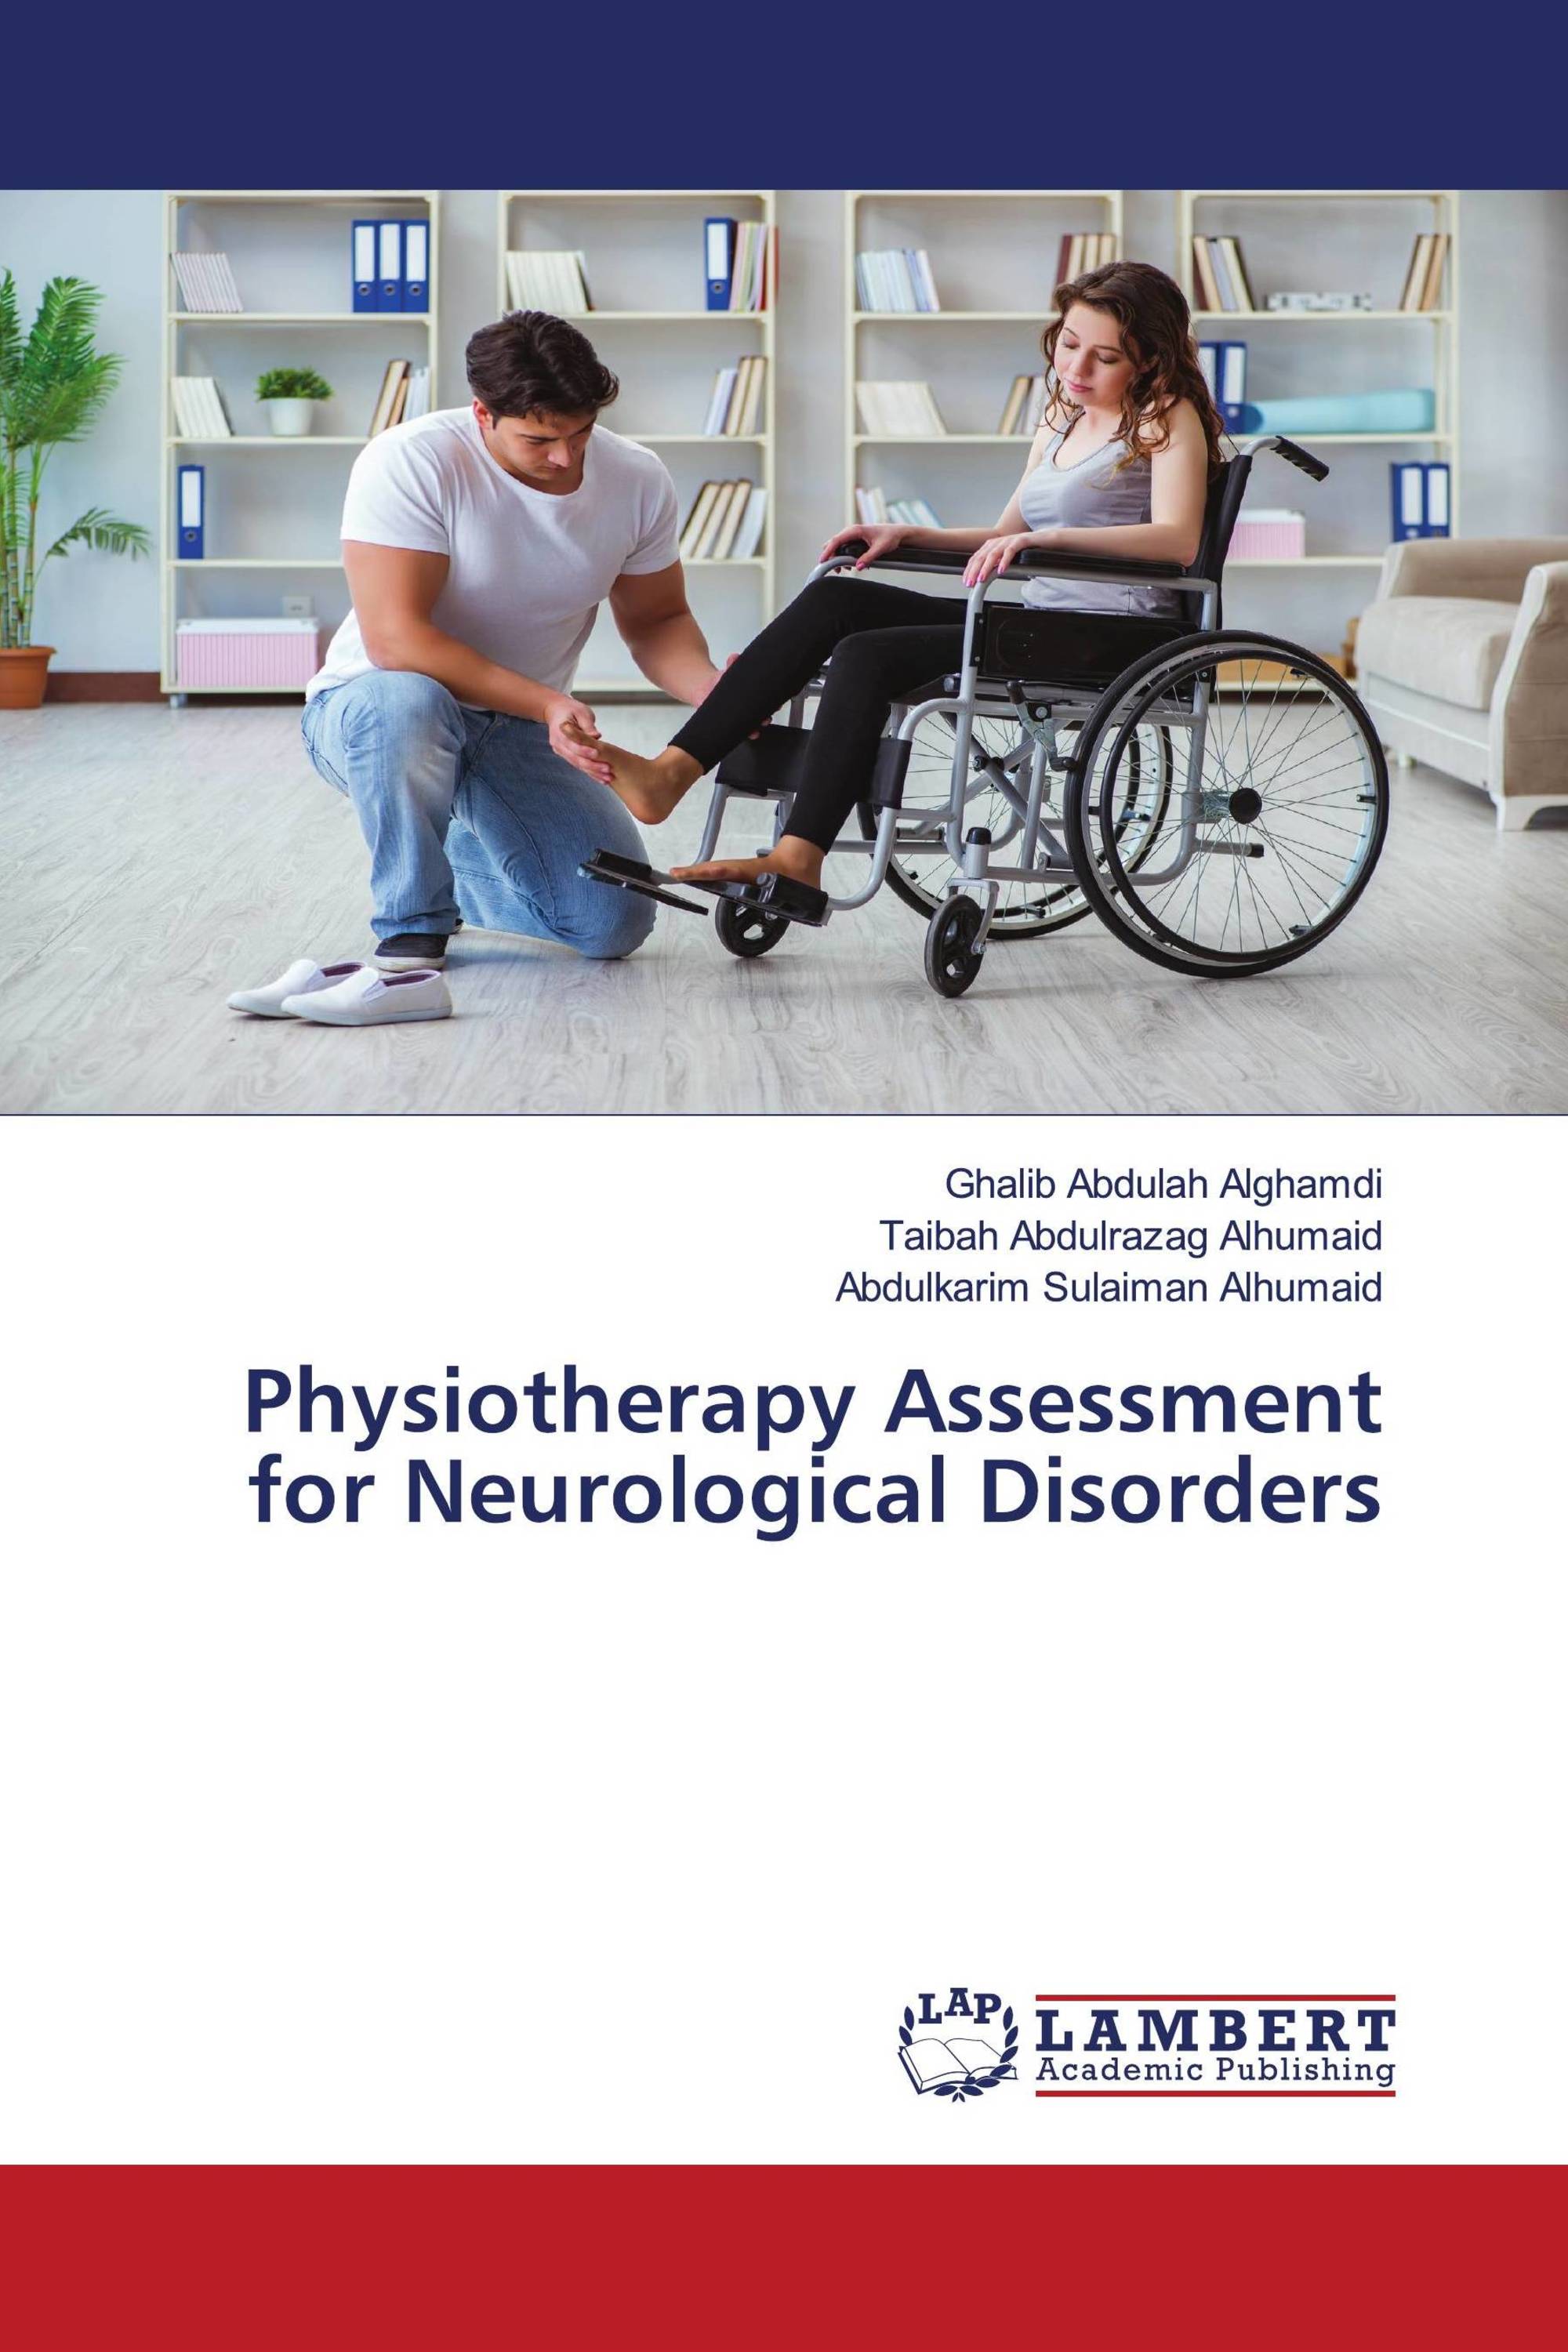 Physiotherapy Assessment for Neurological Disorders